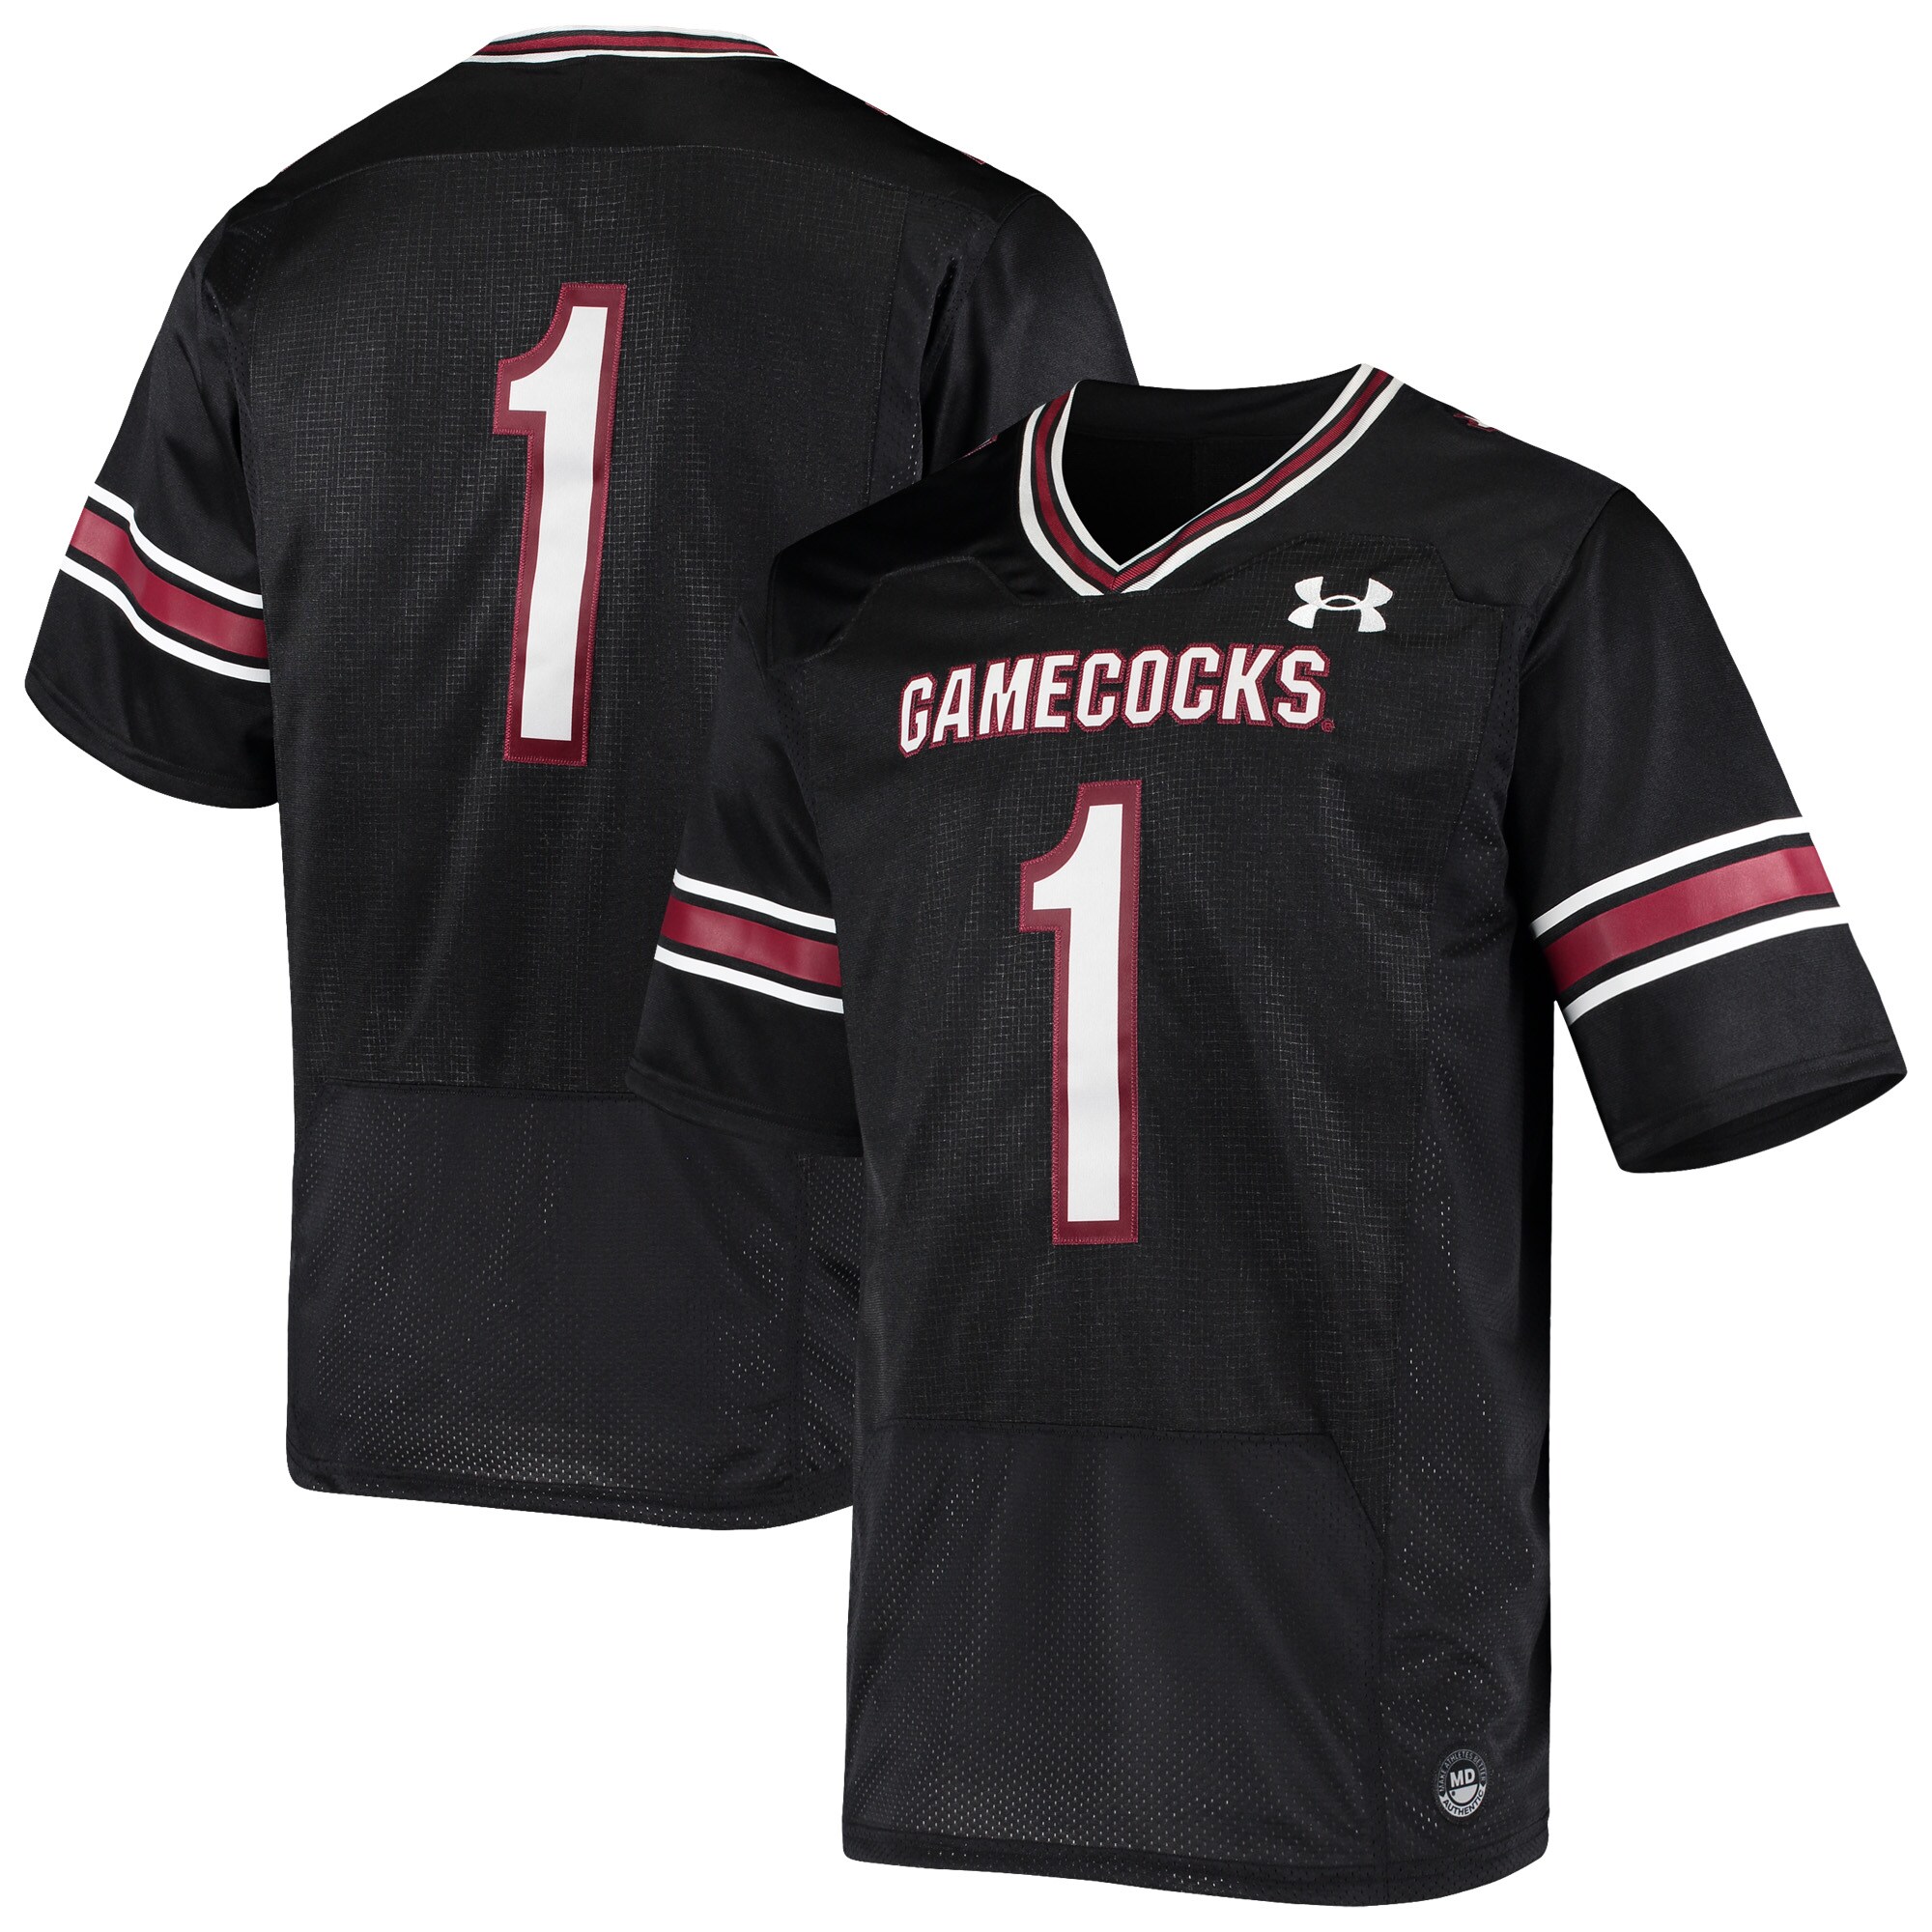 #1 South Carolina Gamecocks Under Armour Premiere  Football Shirts Jersey - Black For Youth Women Men